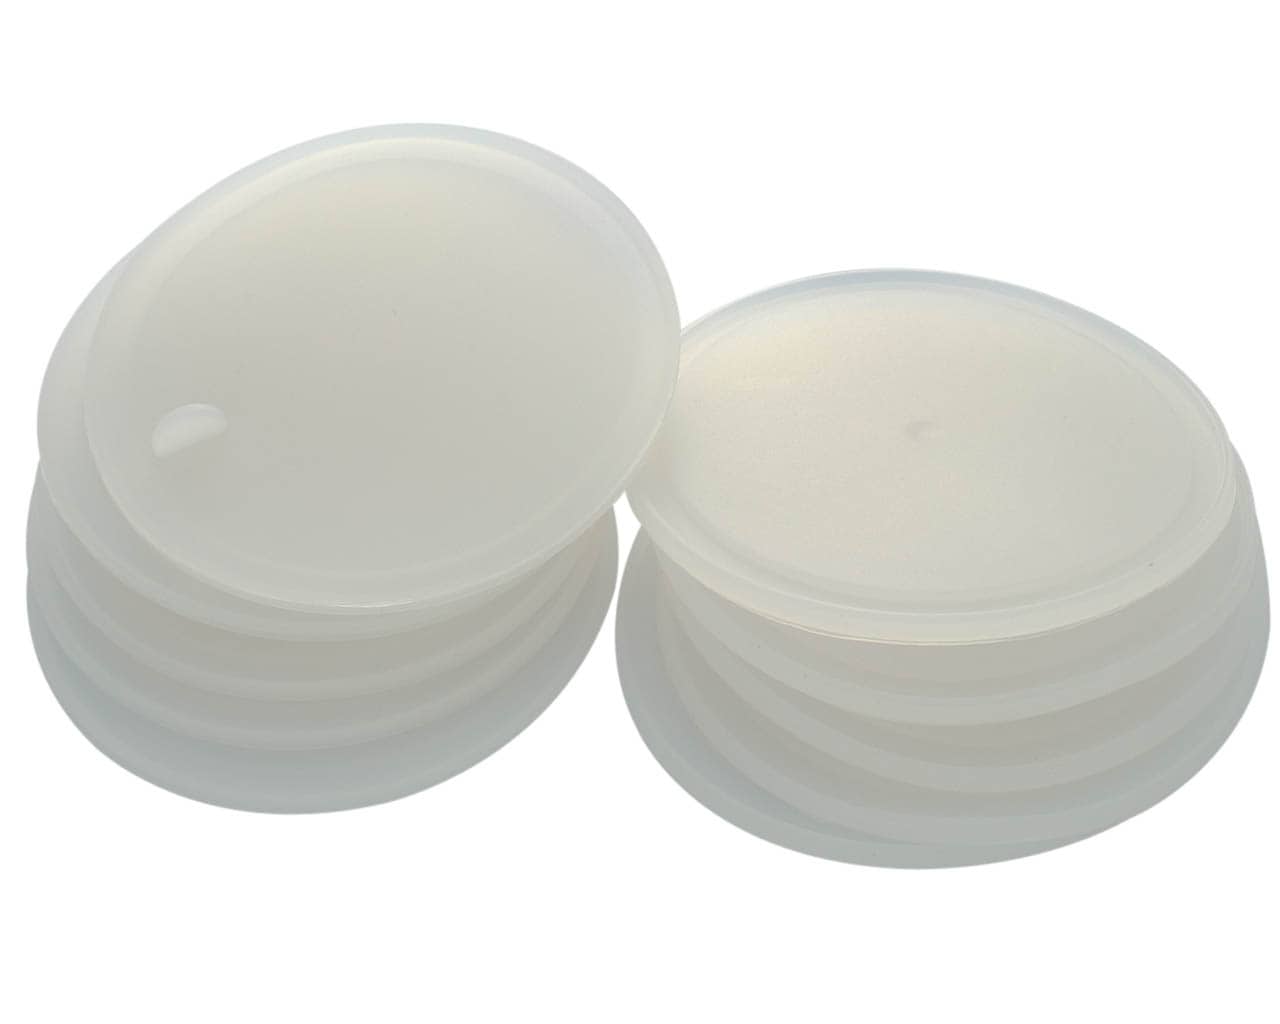 White Tough Top Airtight Lids - Leak-Proof and Reusable Solution 